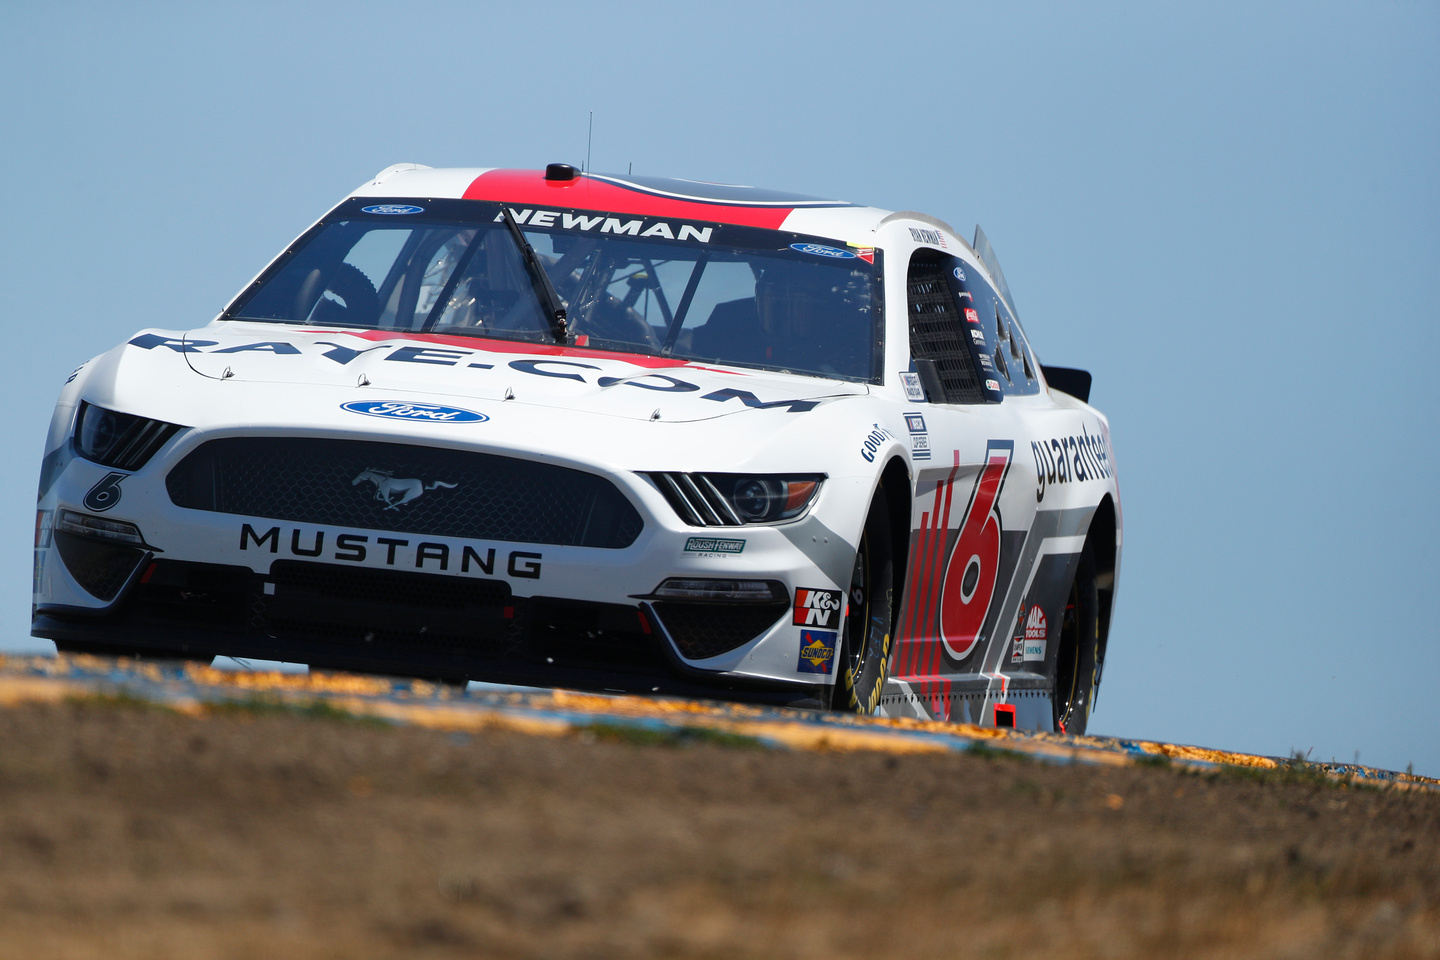 Newman Finishes 33rd After Getting Caught Up in Late Accident at Sonoma